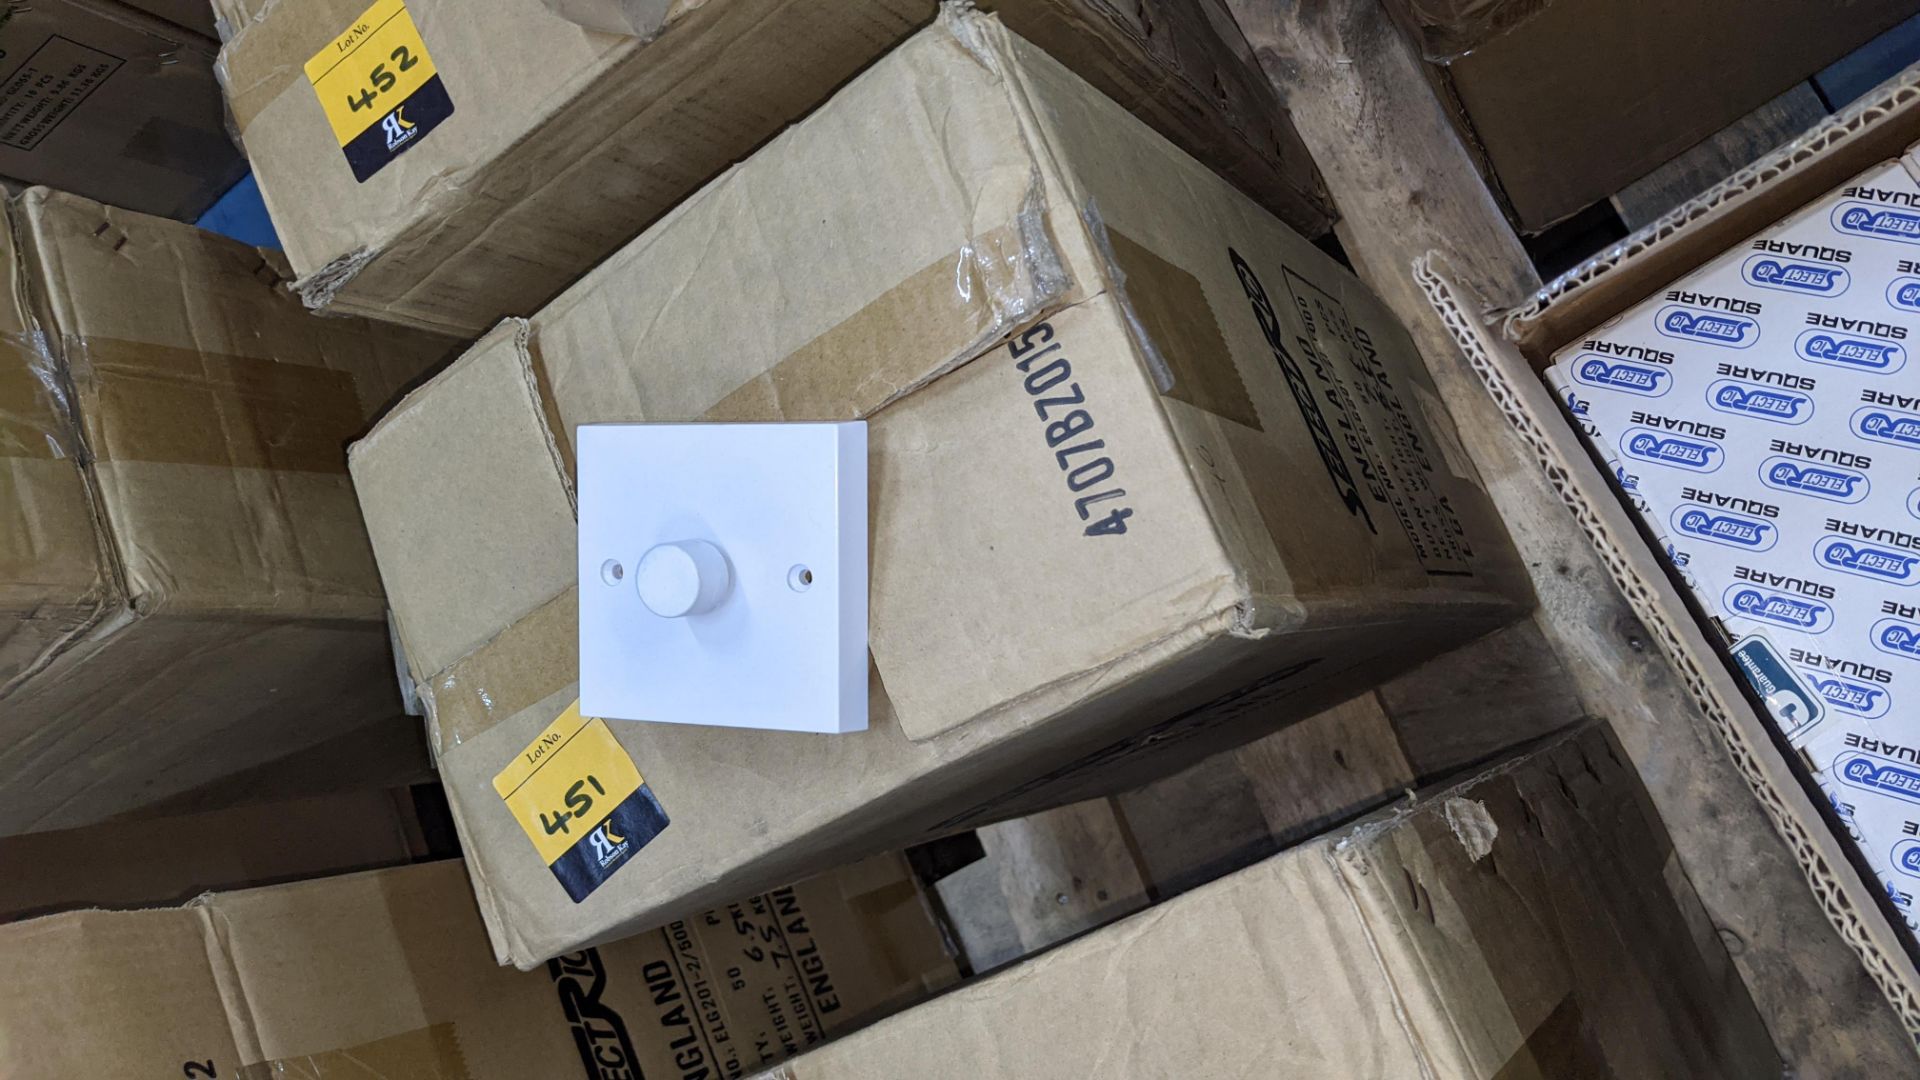 50 off dimmer switches - one carton